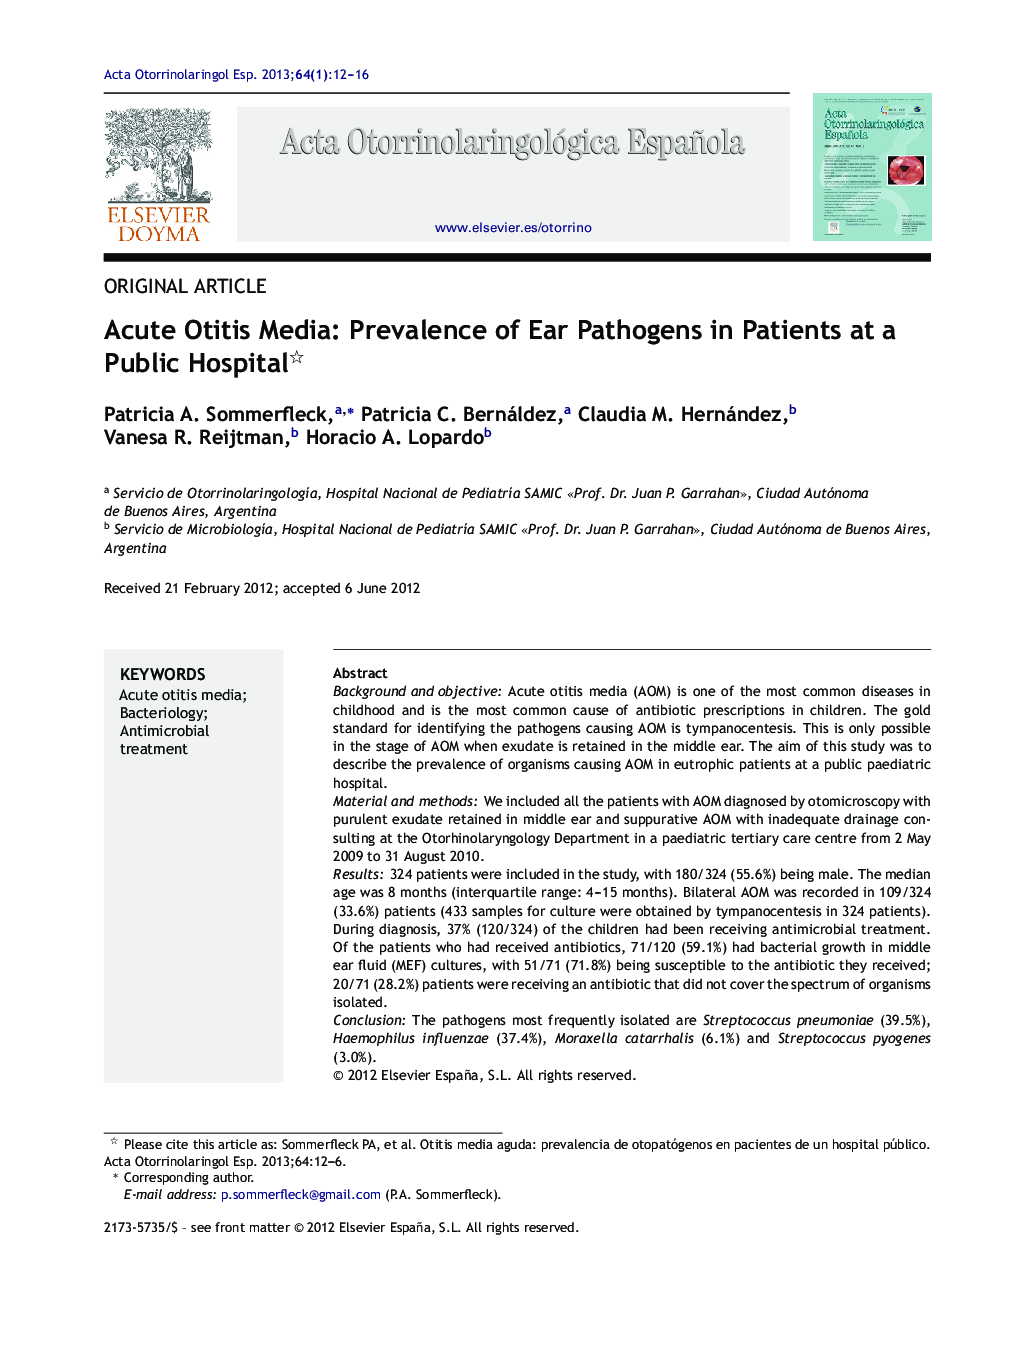 Acute Otitis Media: Prevalence of Ear Pathogens in Patients at a Public Hospital 